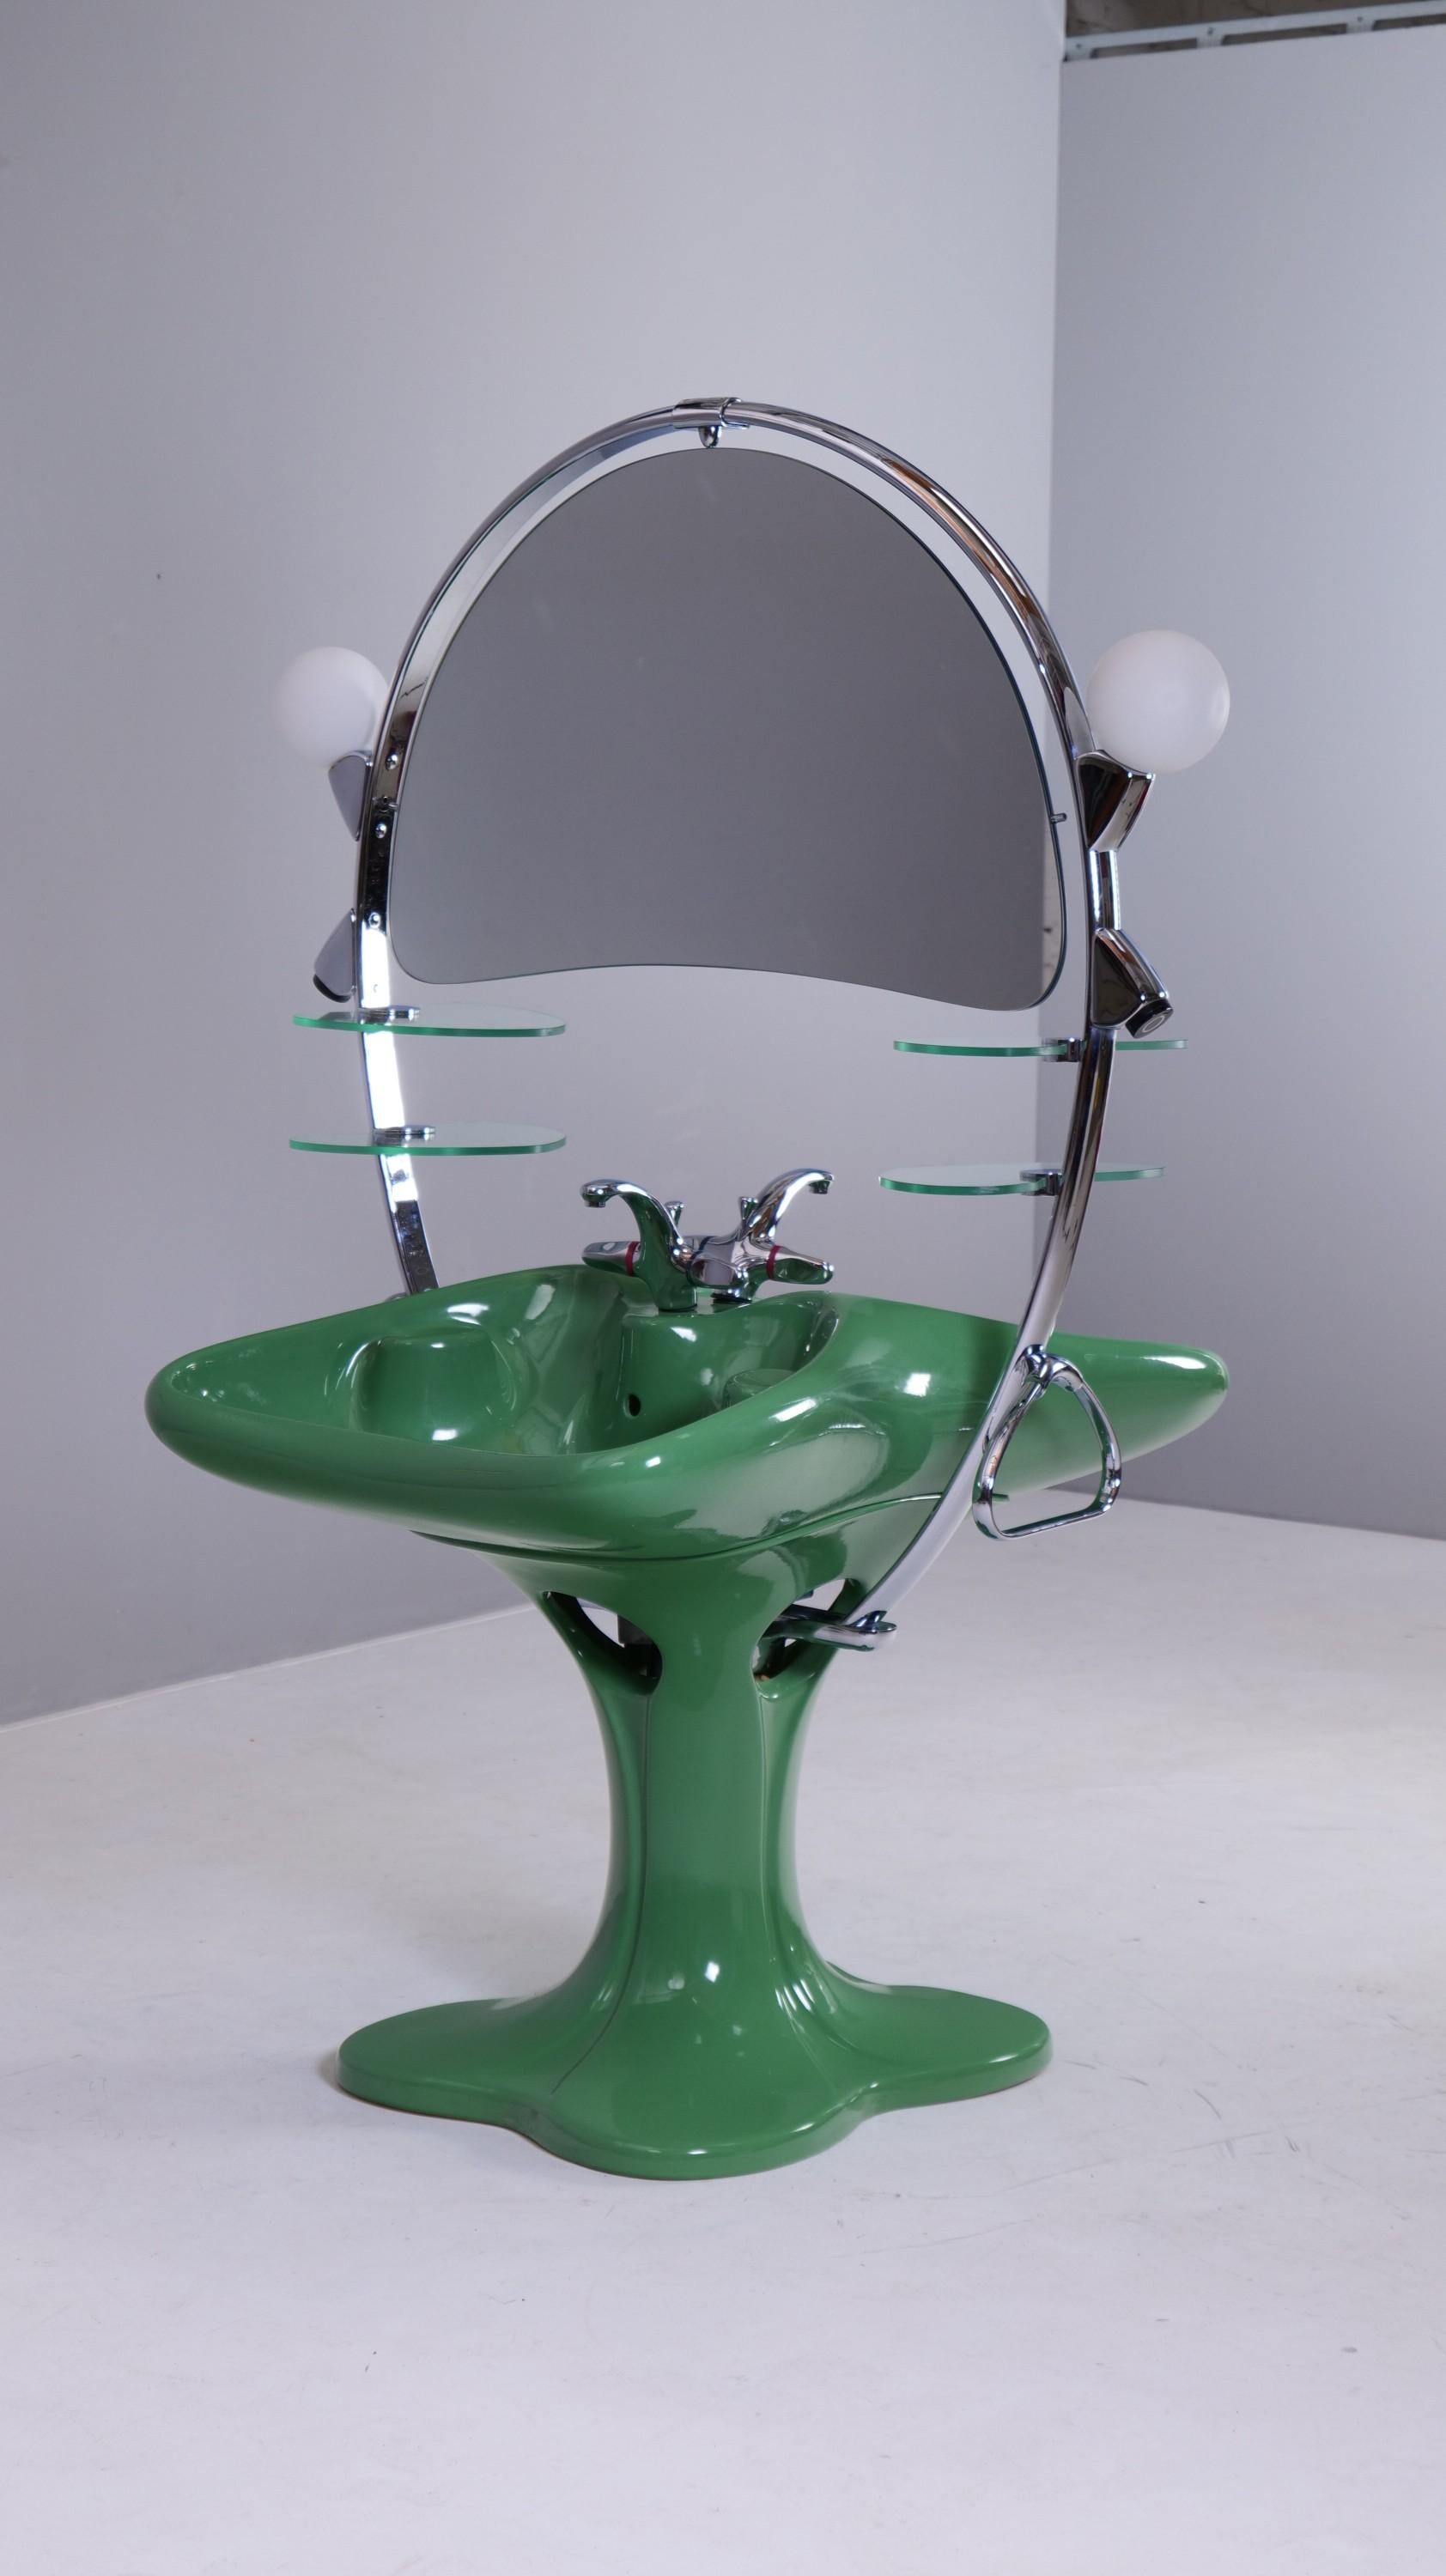 Rare double sink by Luigi Colani from the 1970s.

The sink is installed in the center of the room.

Separated are the two basins by a wide-span arch in chromed metal in the middle of which is a mirror on both sides.

Attached to the arch are